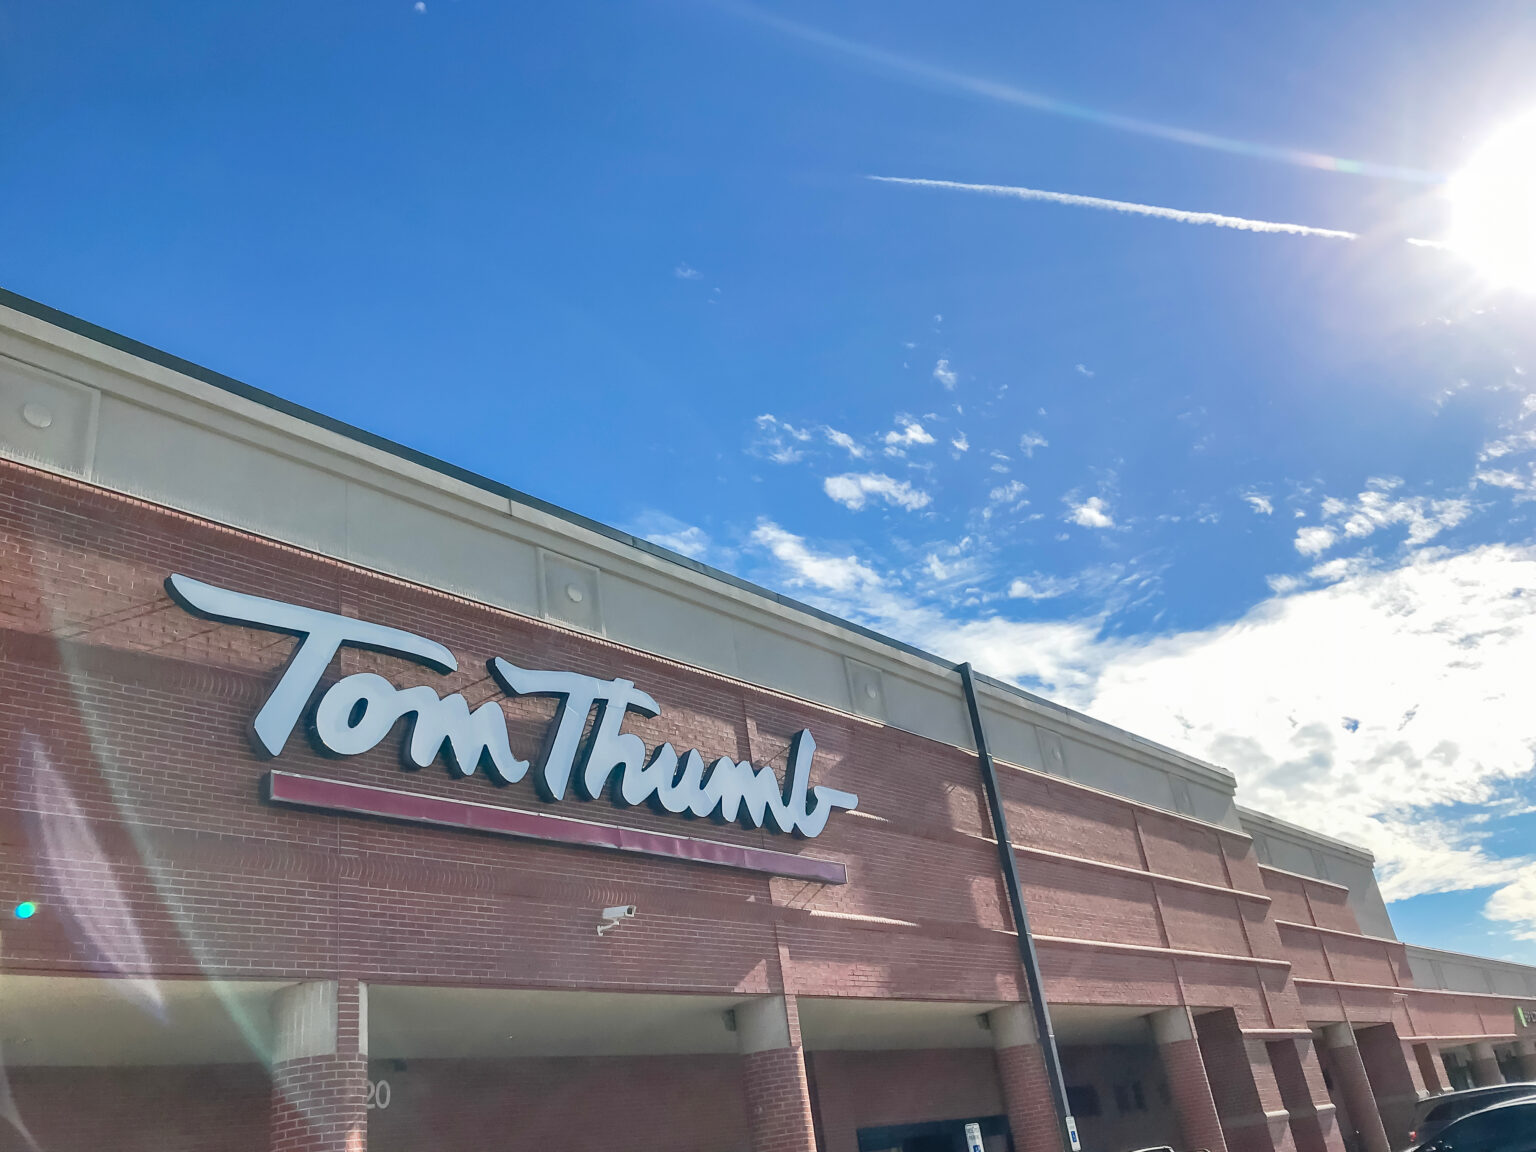 Exterior of a Tom Thumb grocery store